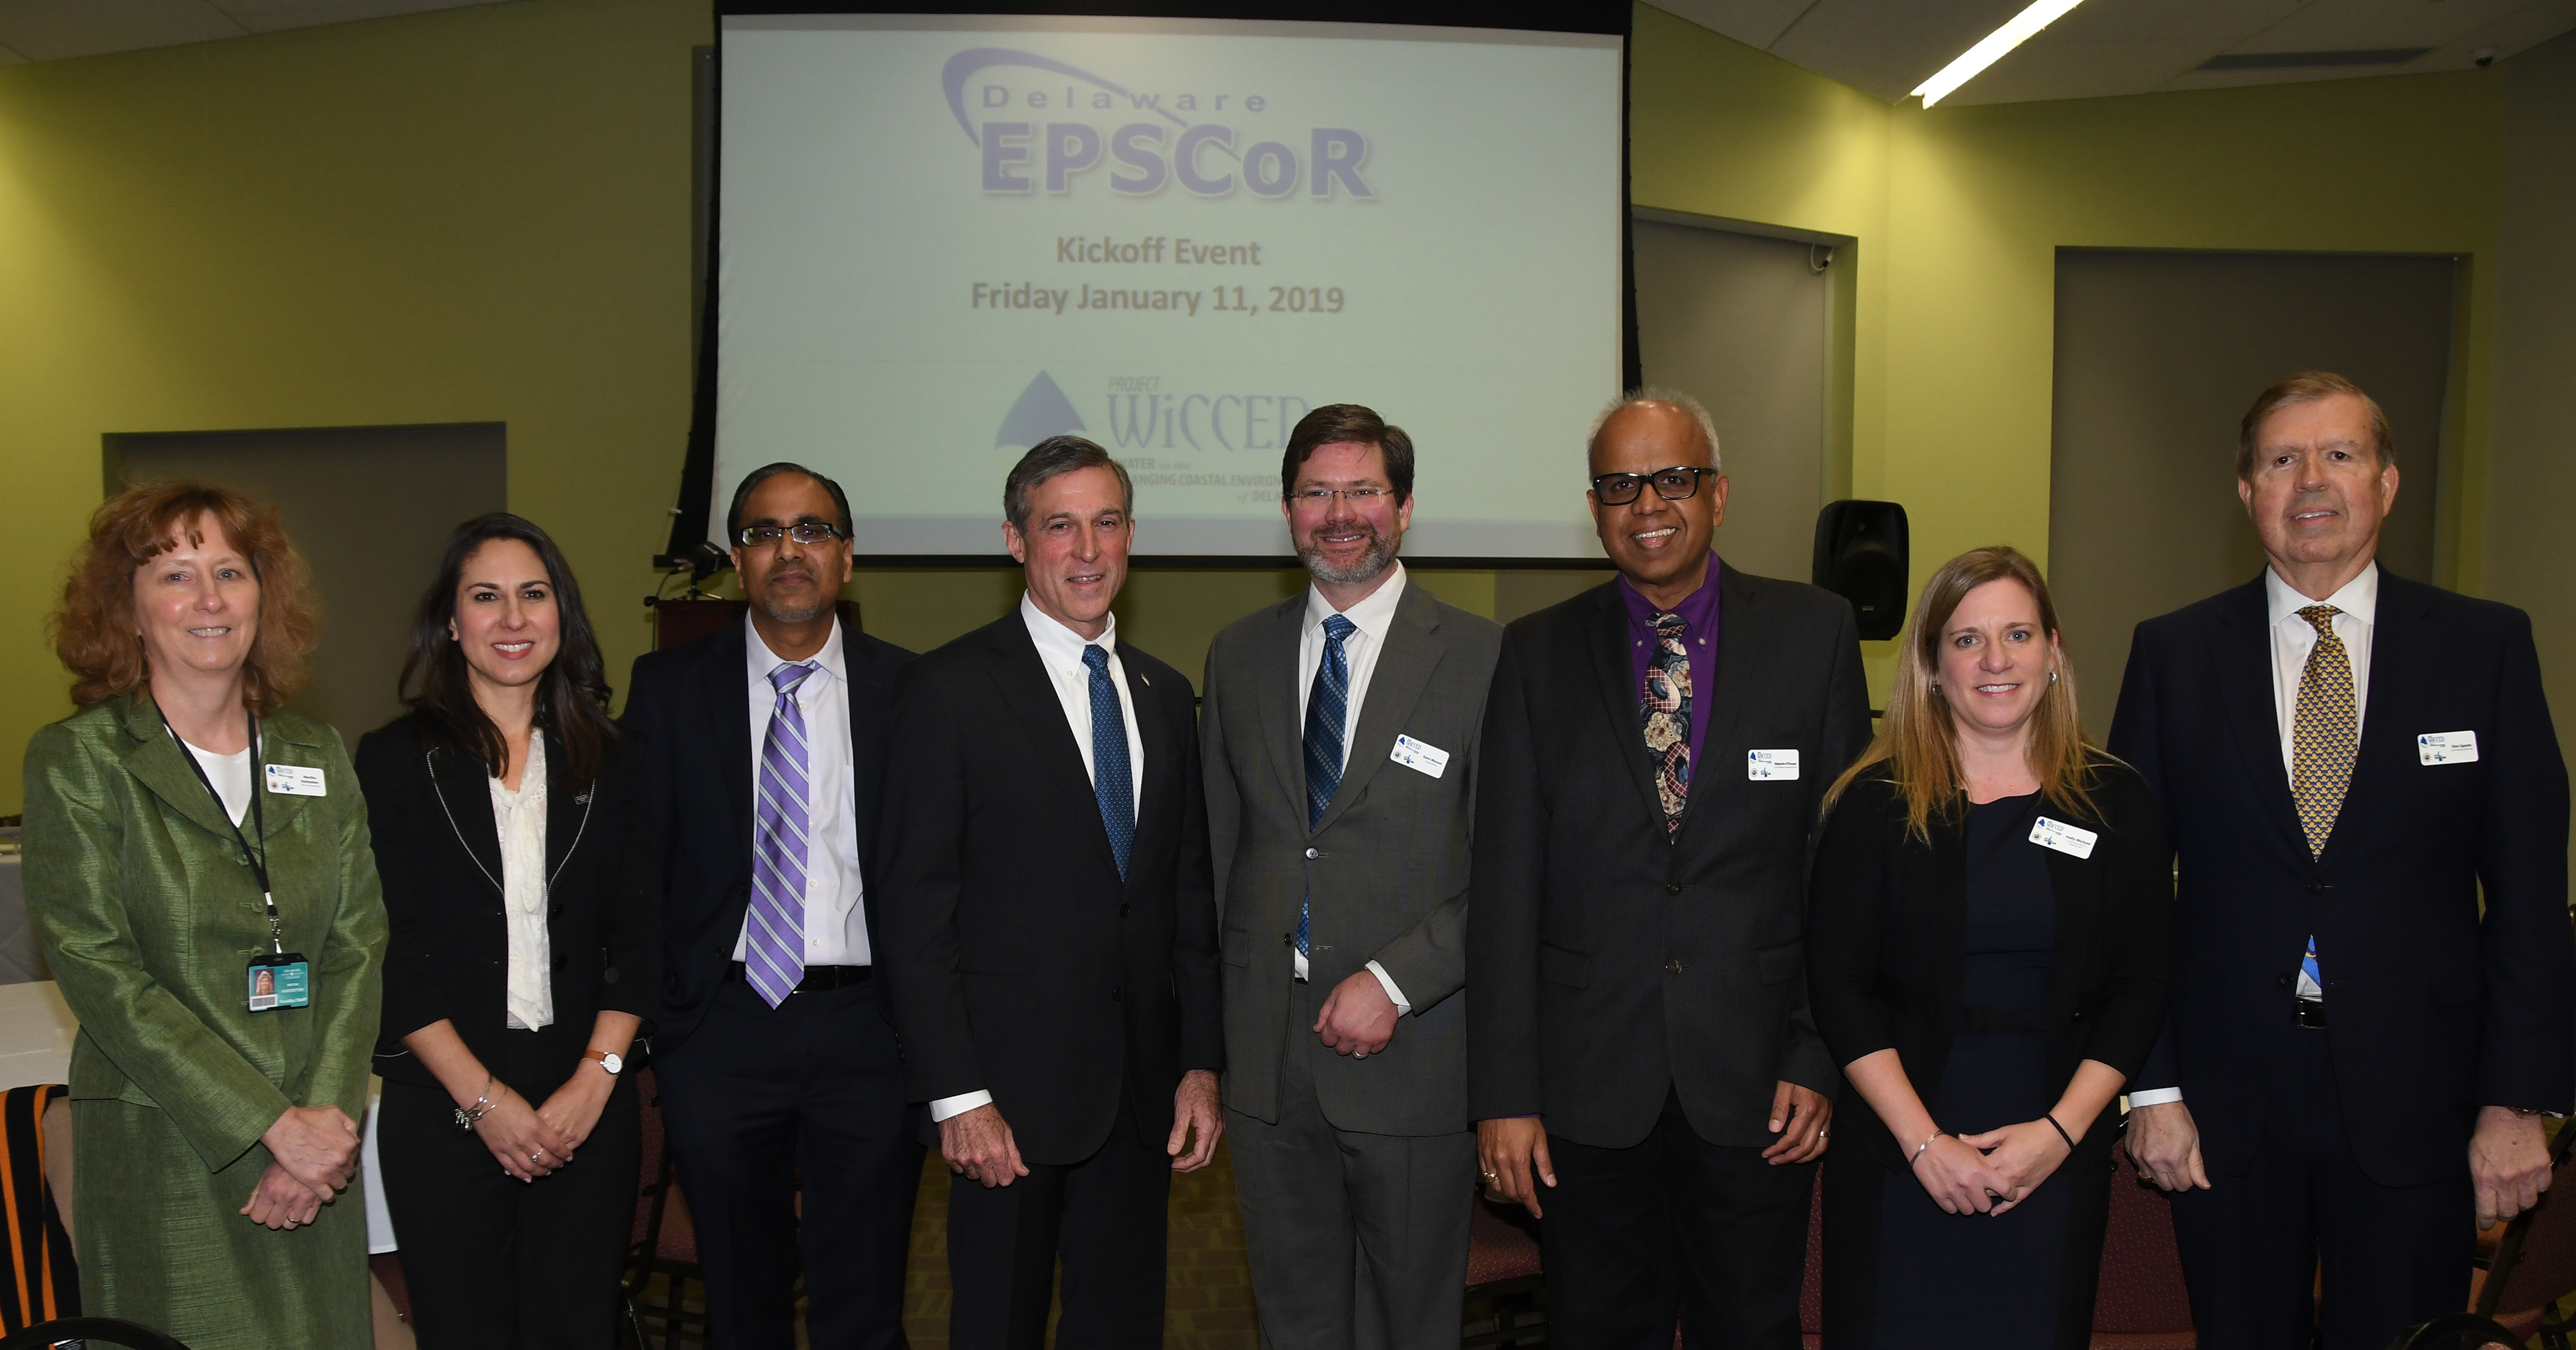 University receives $5.8m for EPSCoR research